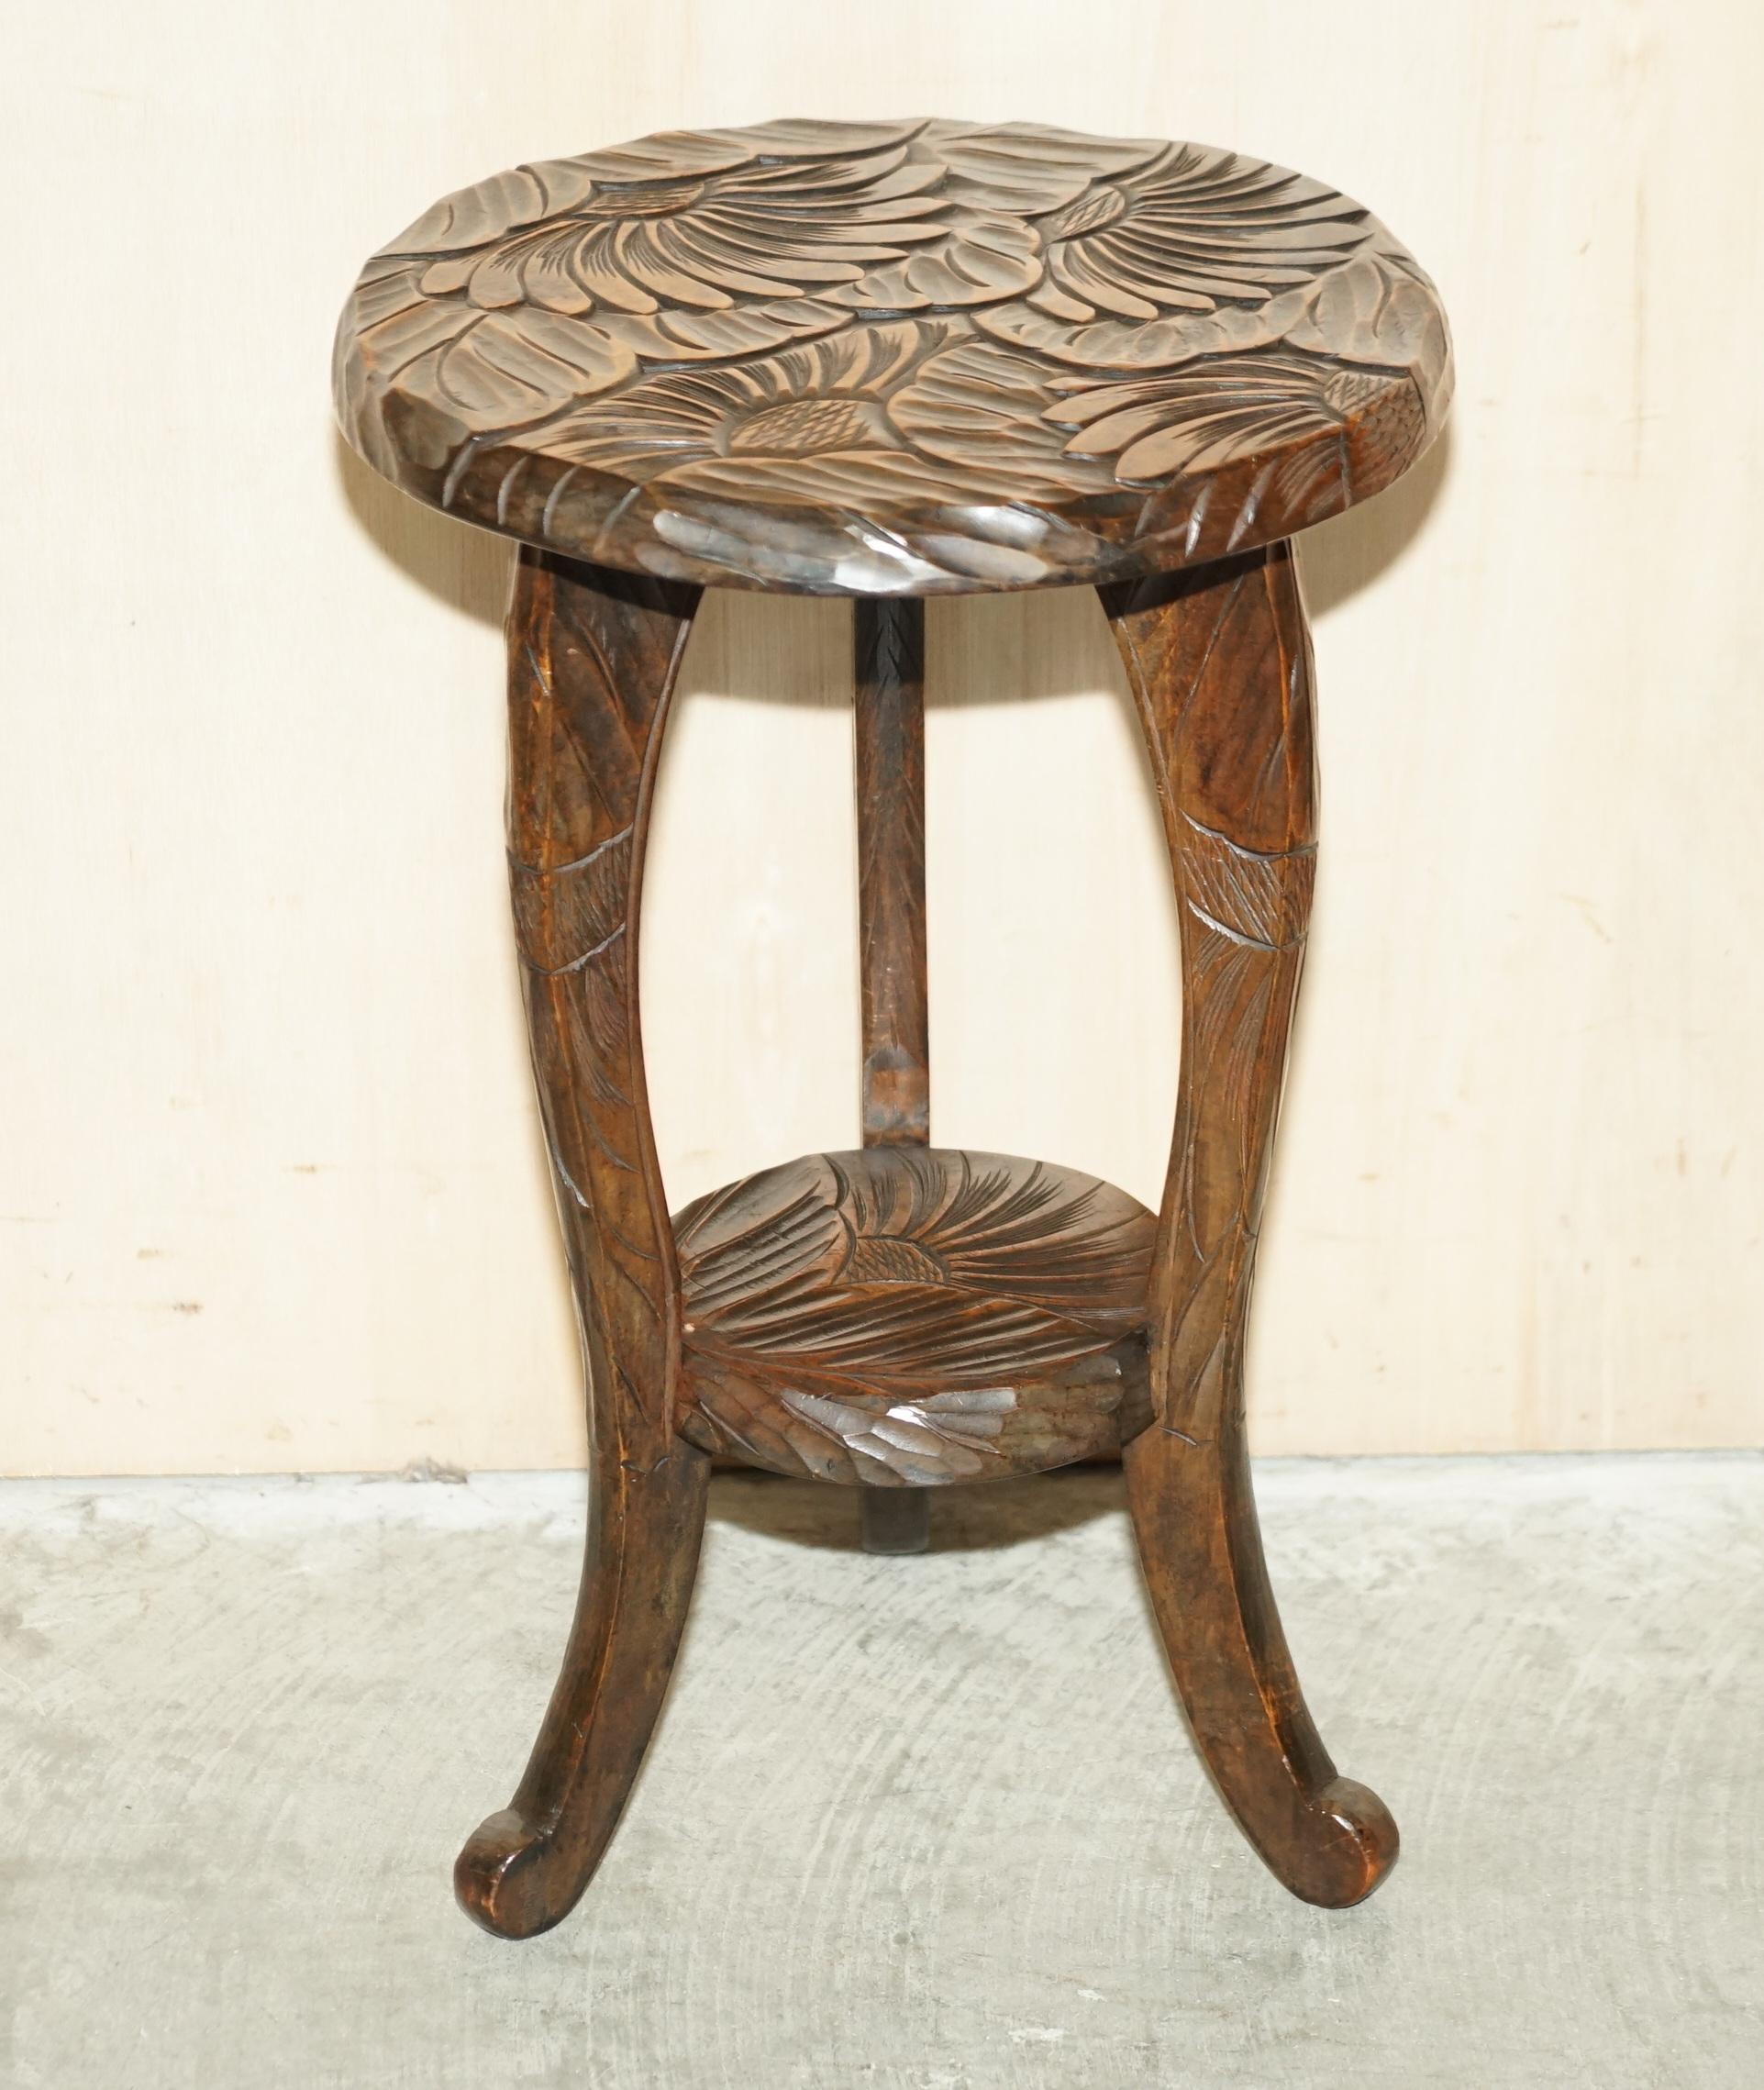 We are delighted to offer for sale this lovely Liberty’s London Japan1905 oriental mahogany side table.

A good-looking piece, its hand carved from top to bottom with floral detailing, I have variations of these types of tables and one very rare